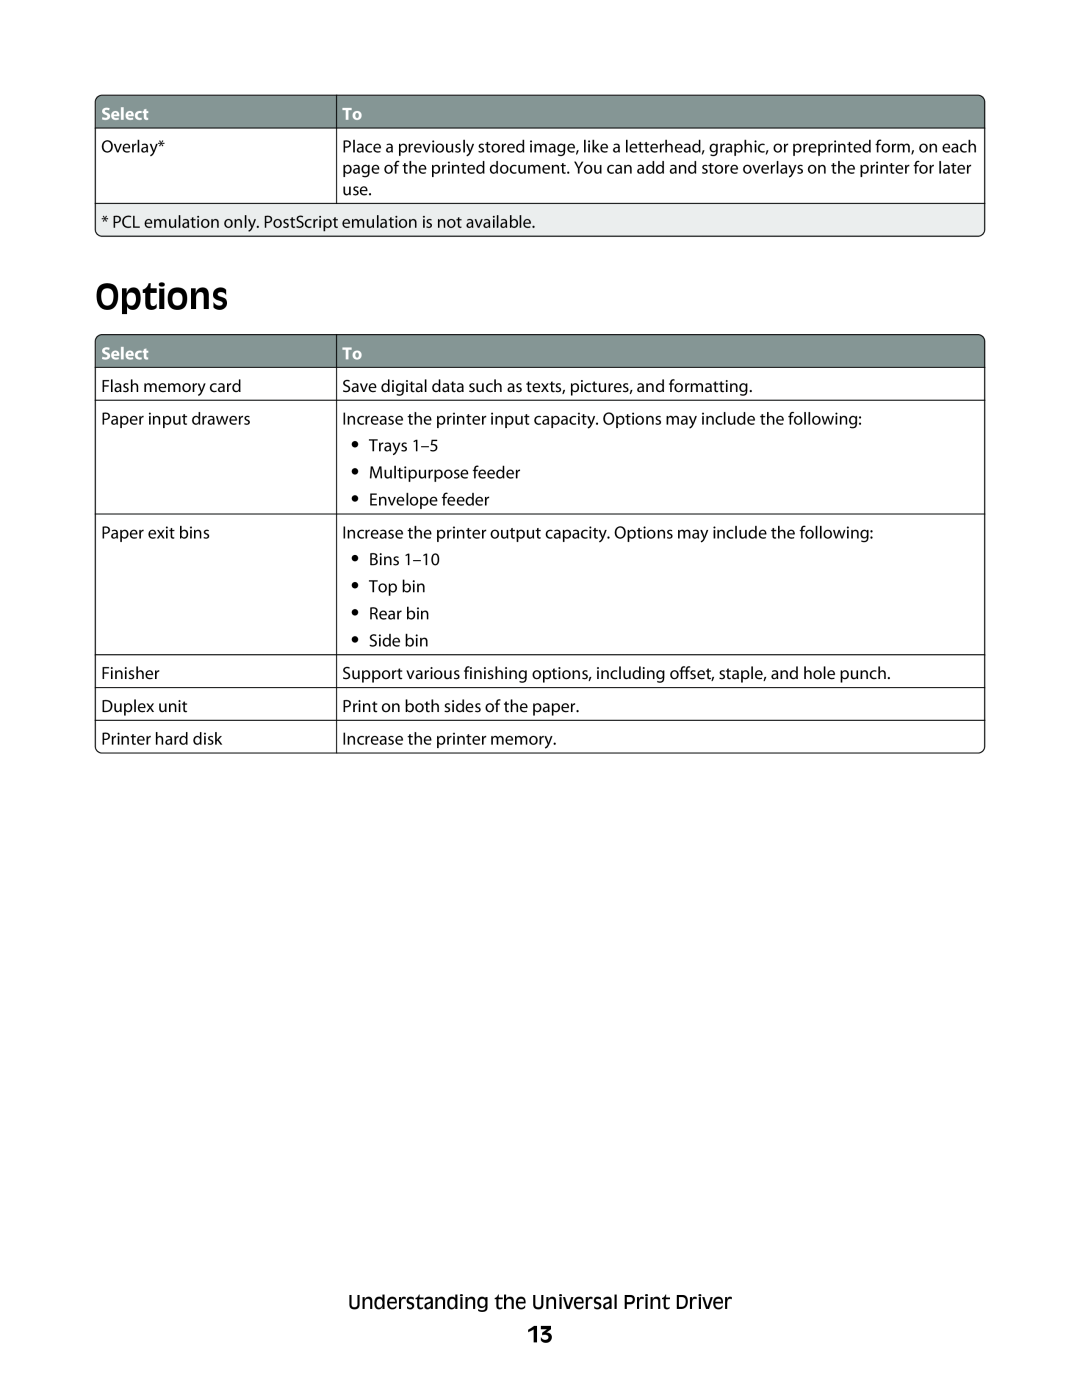 Lexmark Universal Driver manual Options, Understanding the Universal Print Driver, Select 